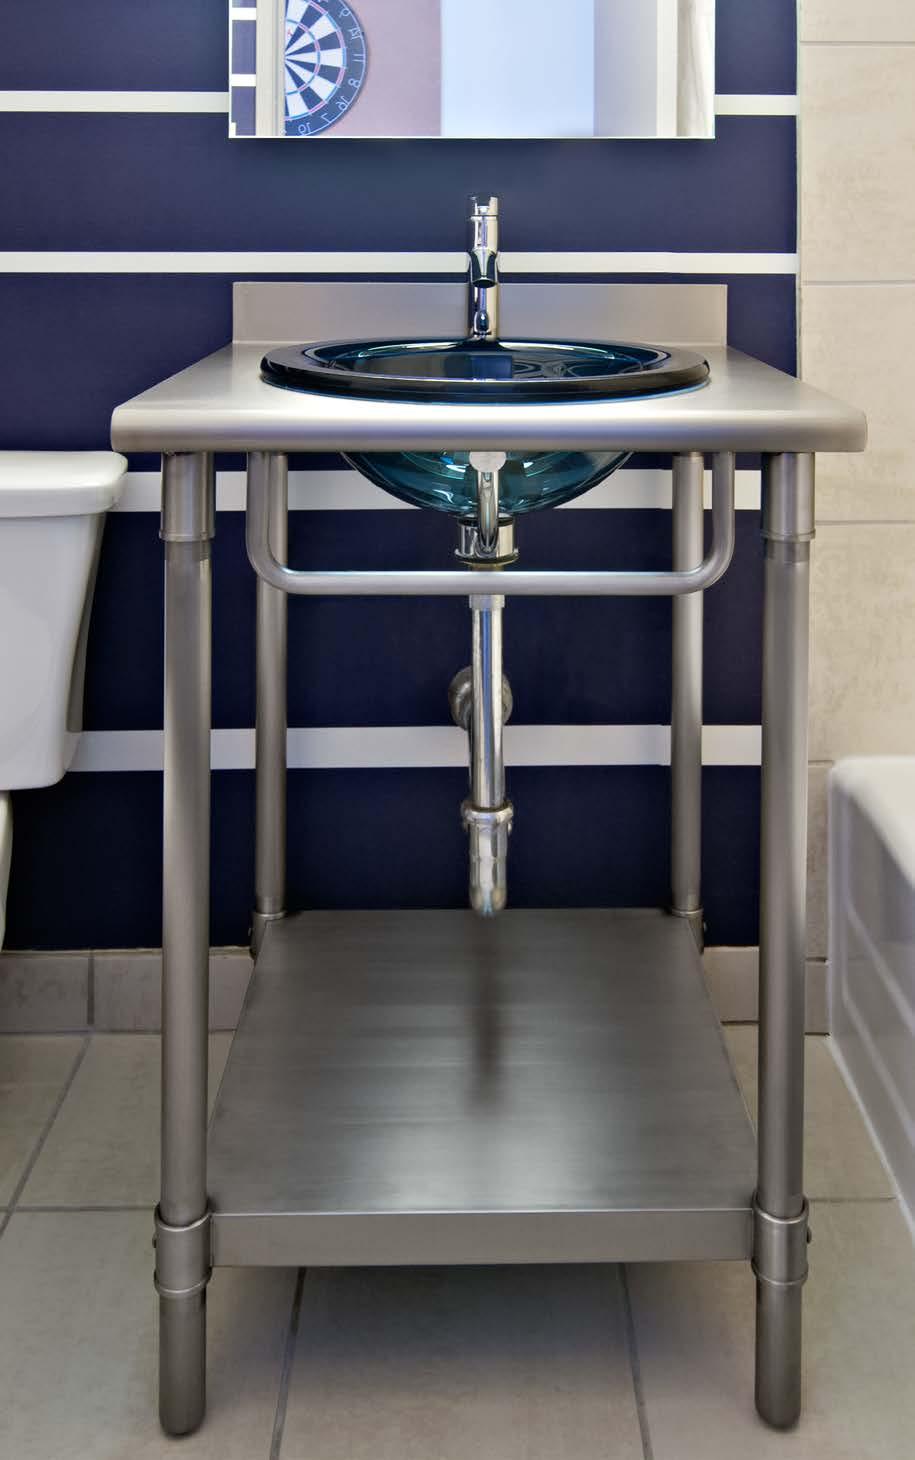 Finish Shown: S-H-120 Brushed Stainless Steel Top